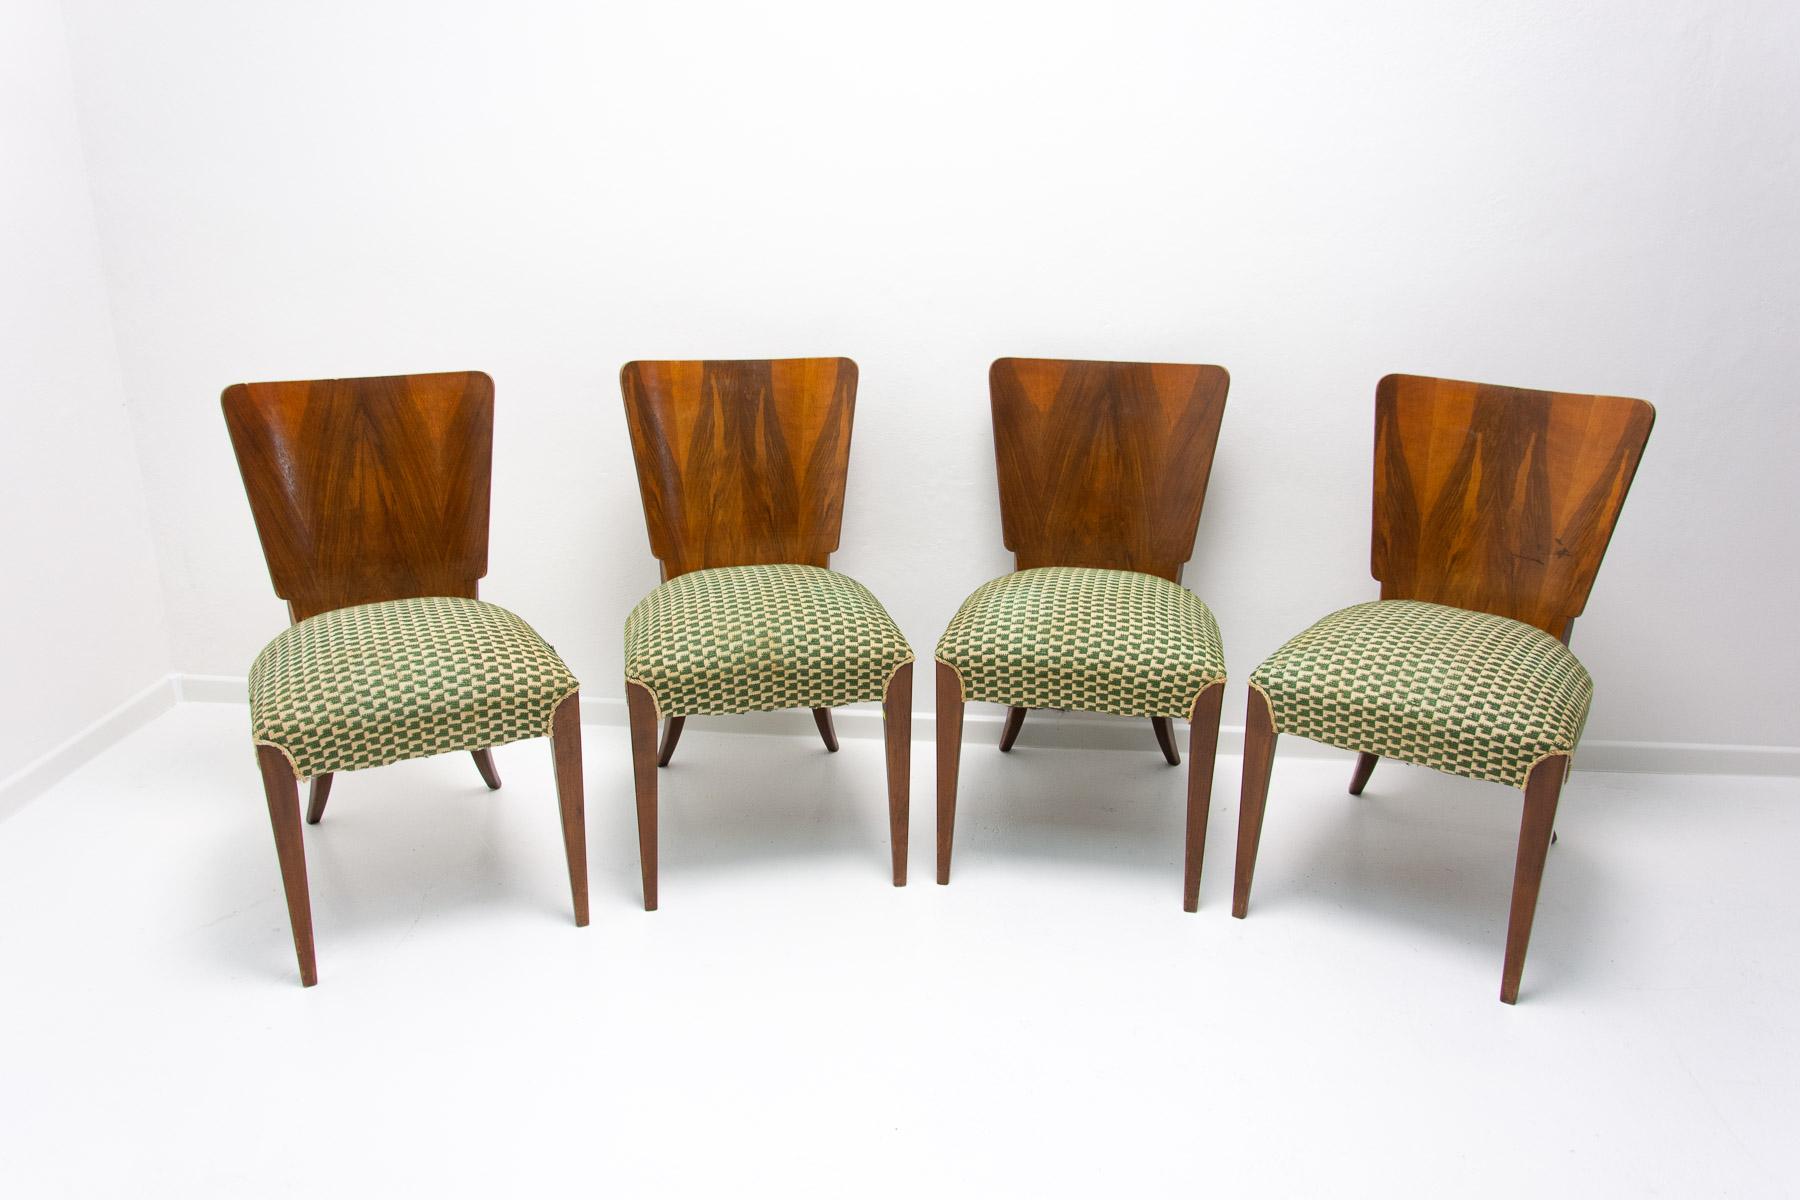 Set of four dining chairs, catalog number H-214, designed by Jindrich Halabala in the 1930´s, manufactured in ÚP Závody in the 1950´s. It features walnut veneer and original upholstery. The chairs are in very good Vintage condition, showing signs of